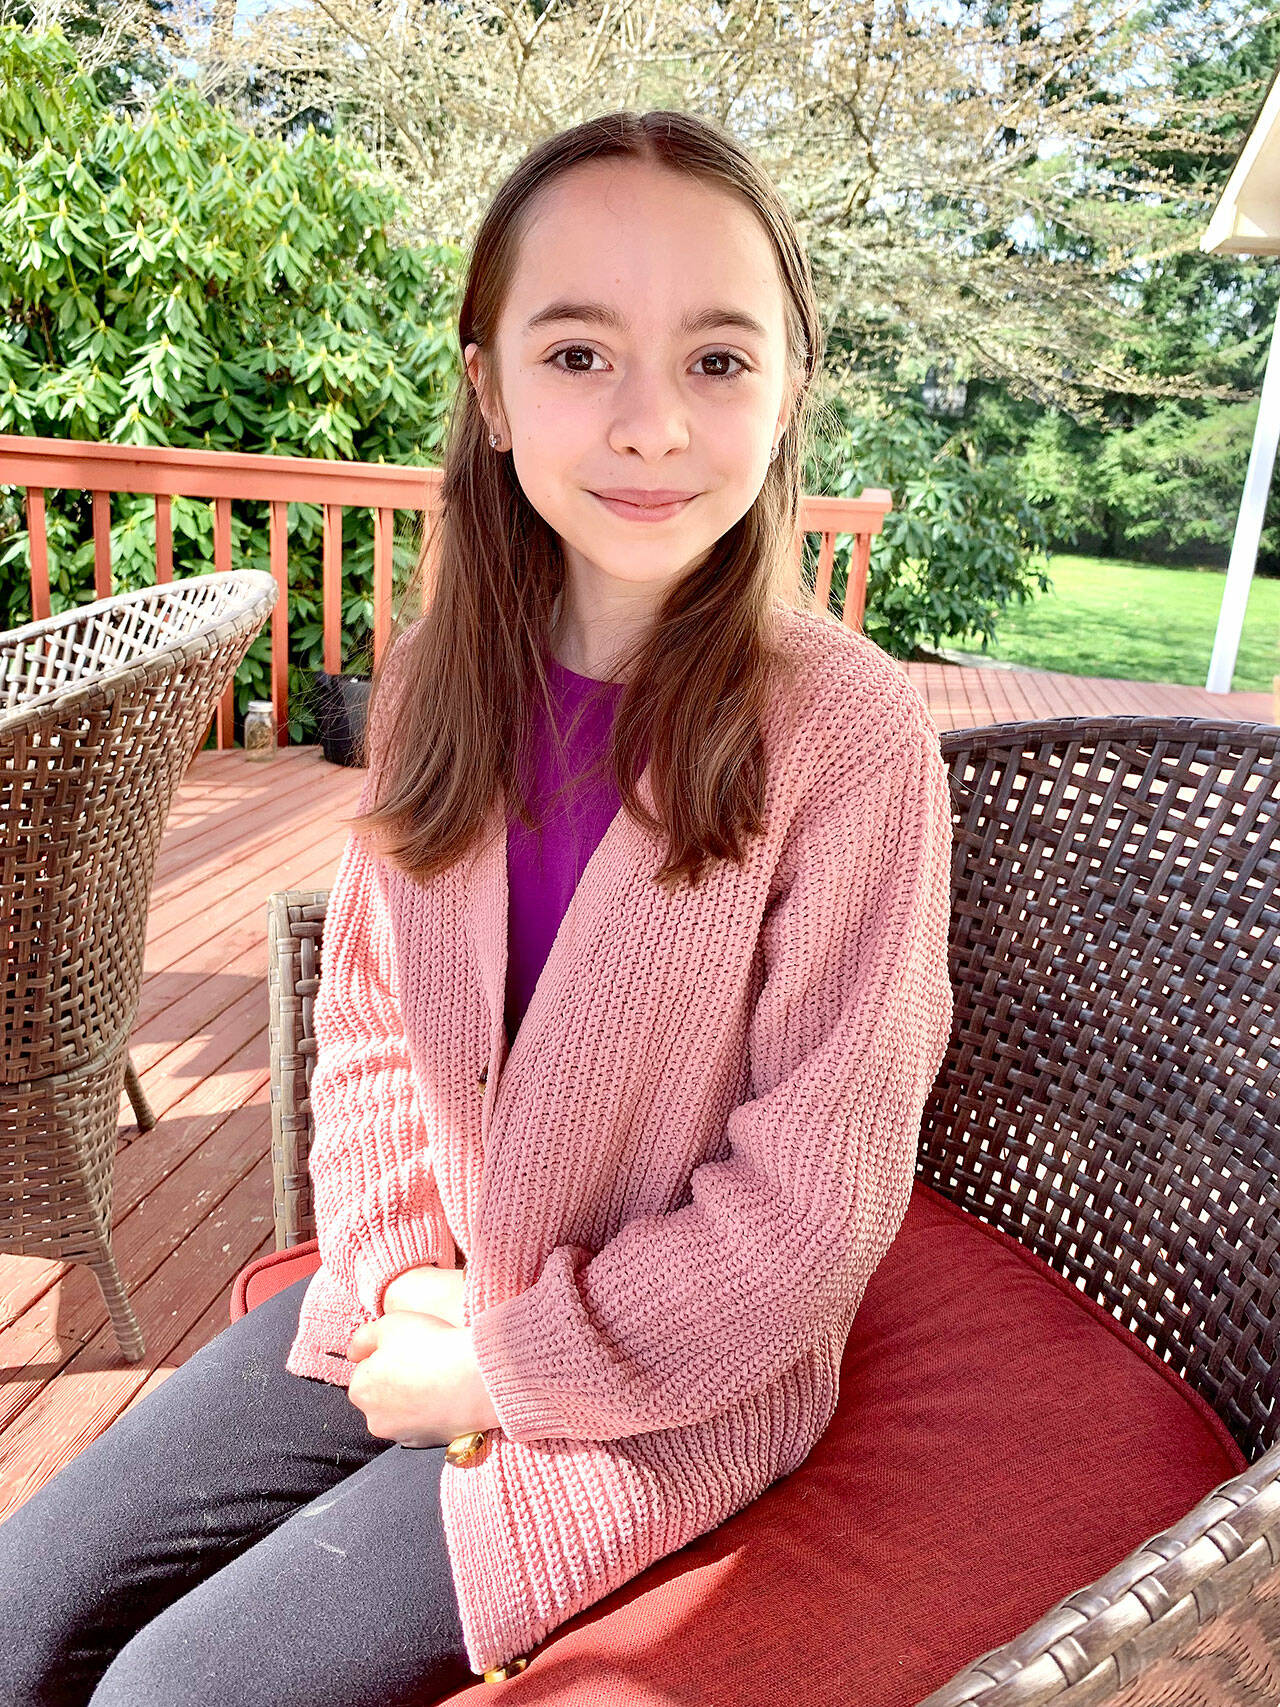 Fifth-grader Alyssa Kusherets mixes her love of acting with a desire to have a career in the world of space, possibly working for NASA. (Bob Smith | Kitsap News Group)